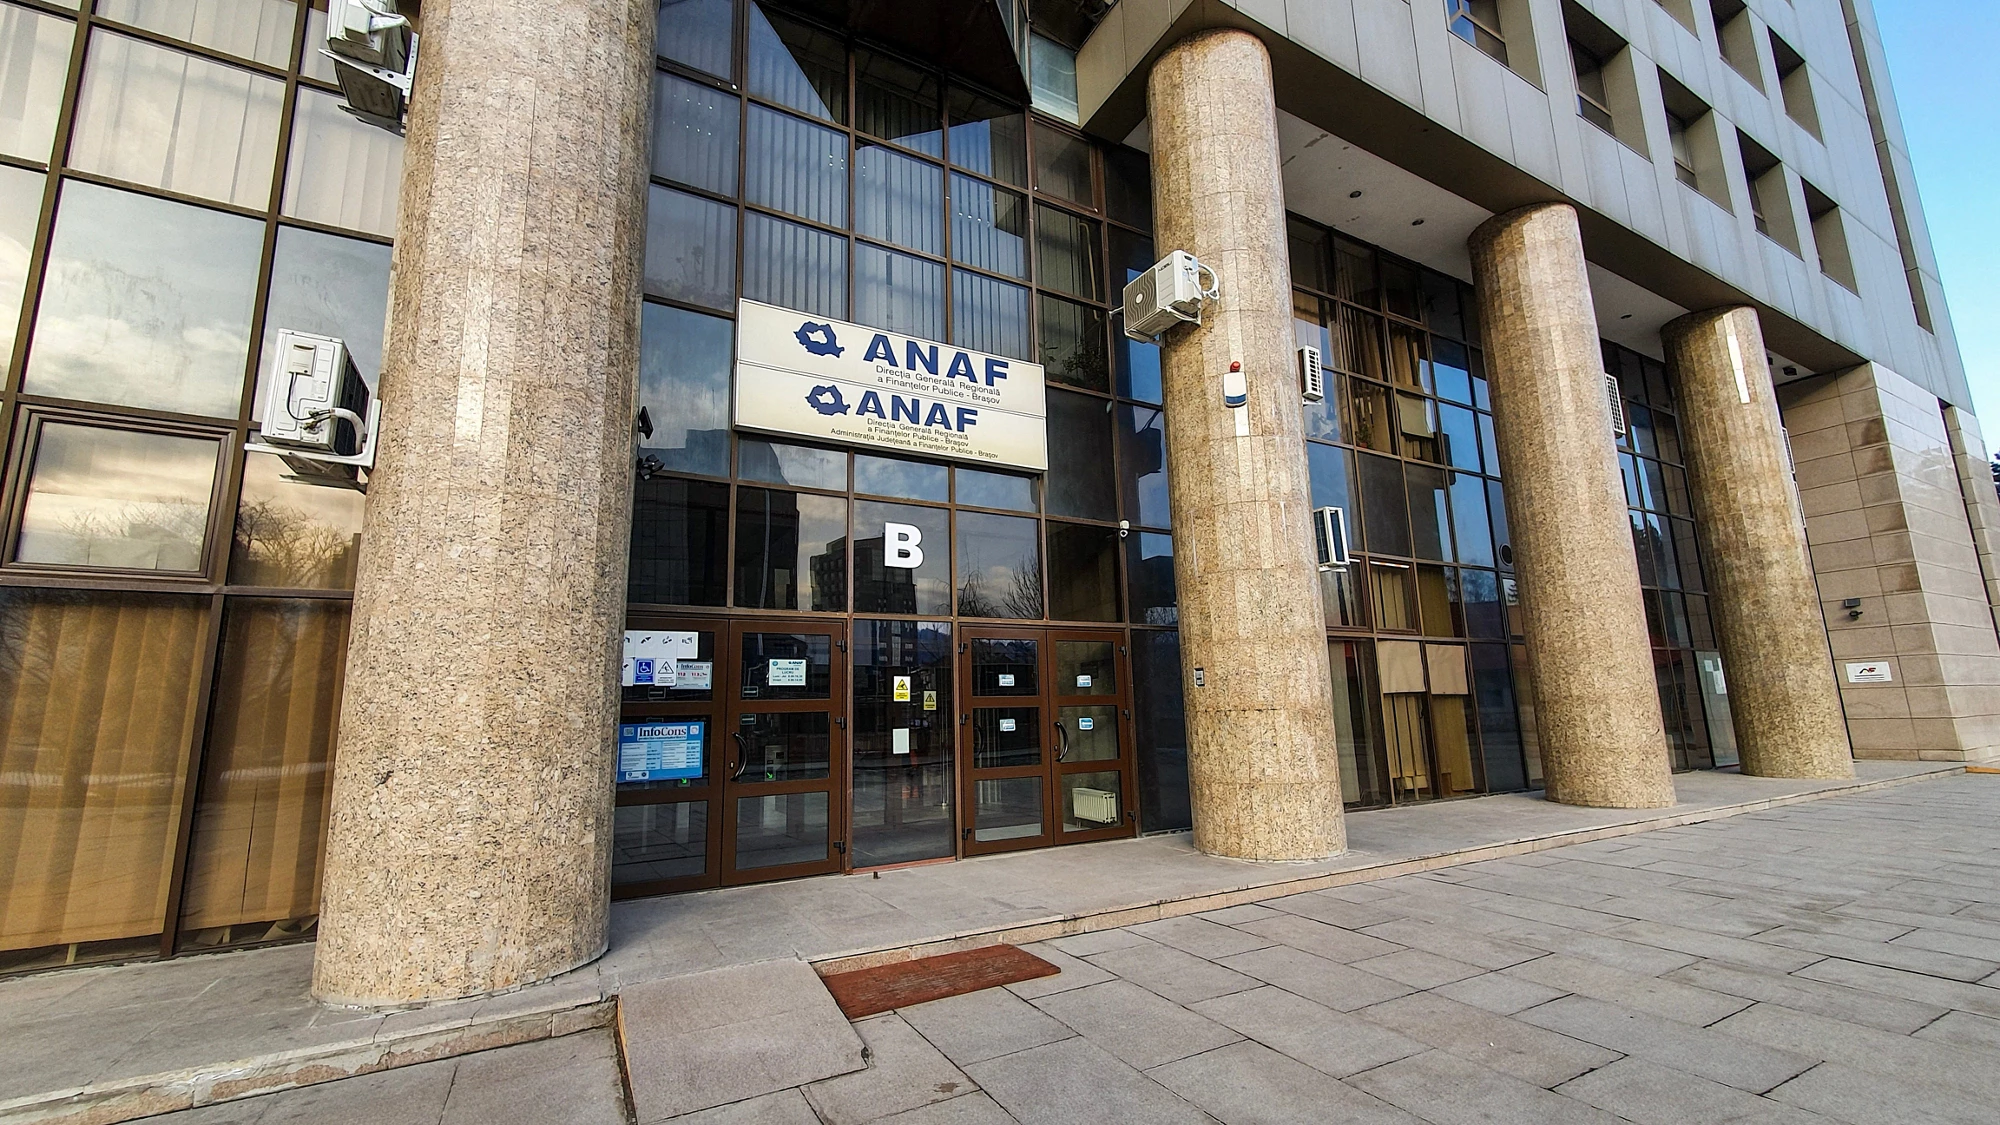 ANAF, National Agency For Fiscal Administration, Directorate of Public Finance, in Romania. Photo: PJ Williams